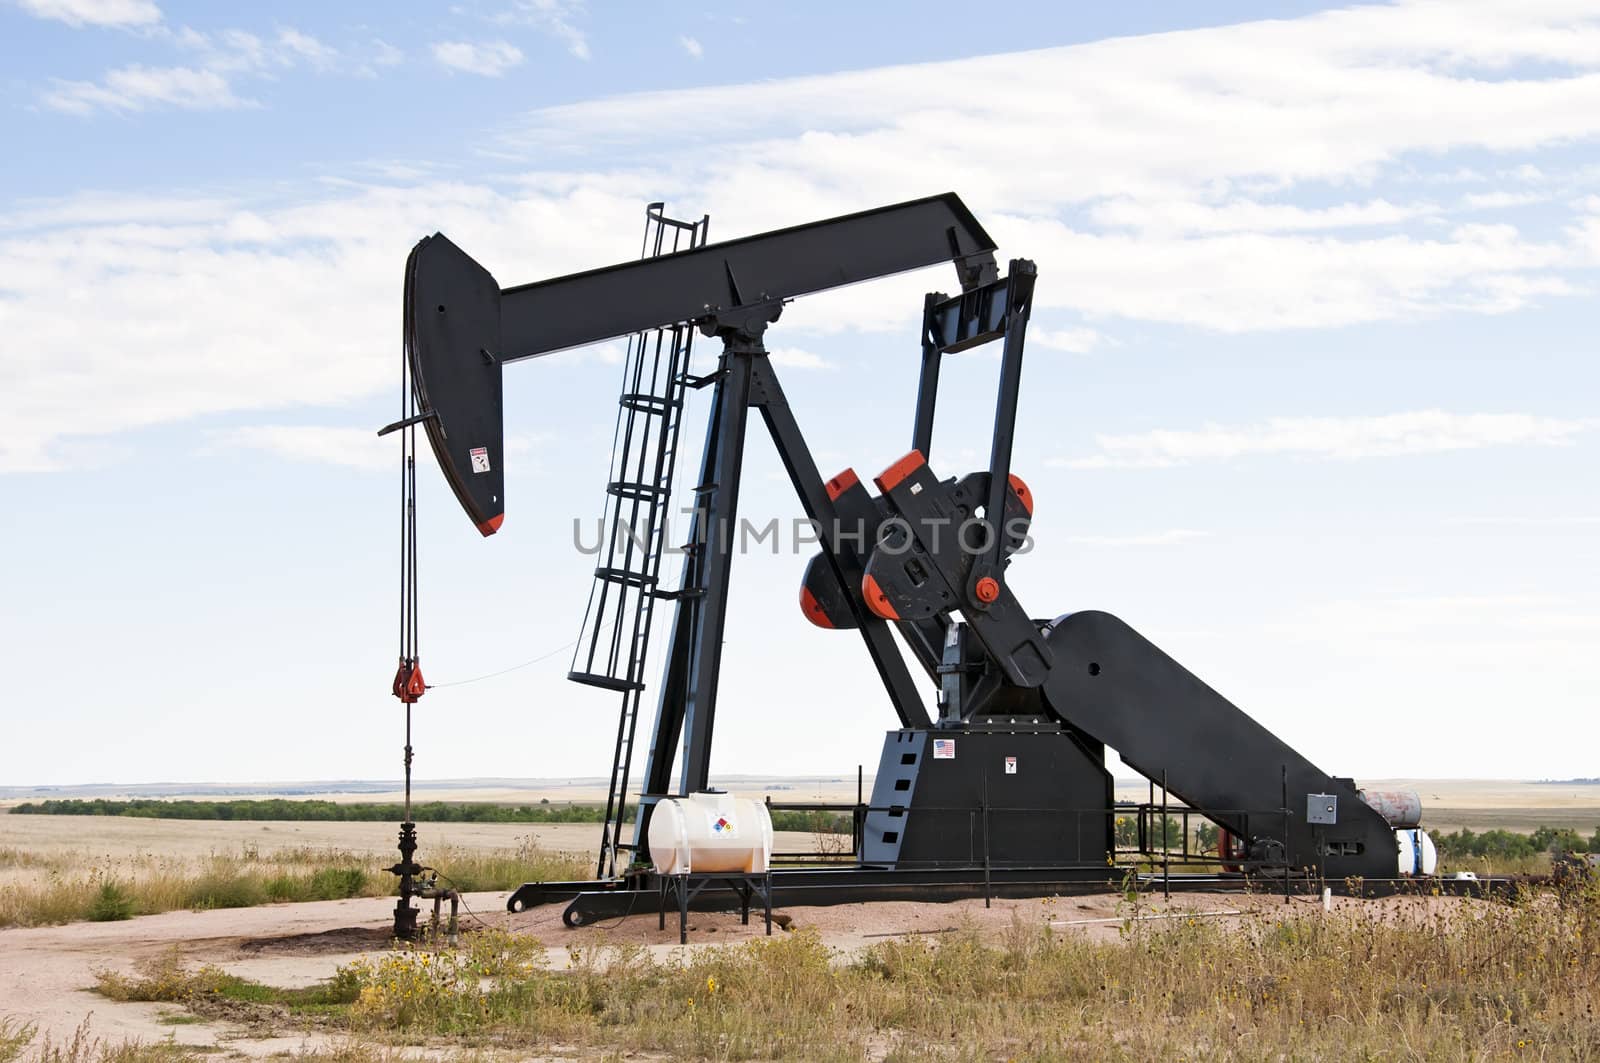 Pump jack starting the lifting stroke to brink crude oil up out of a producing oil well.